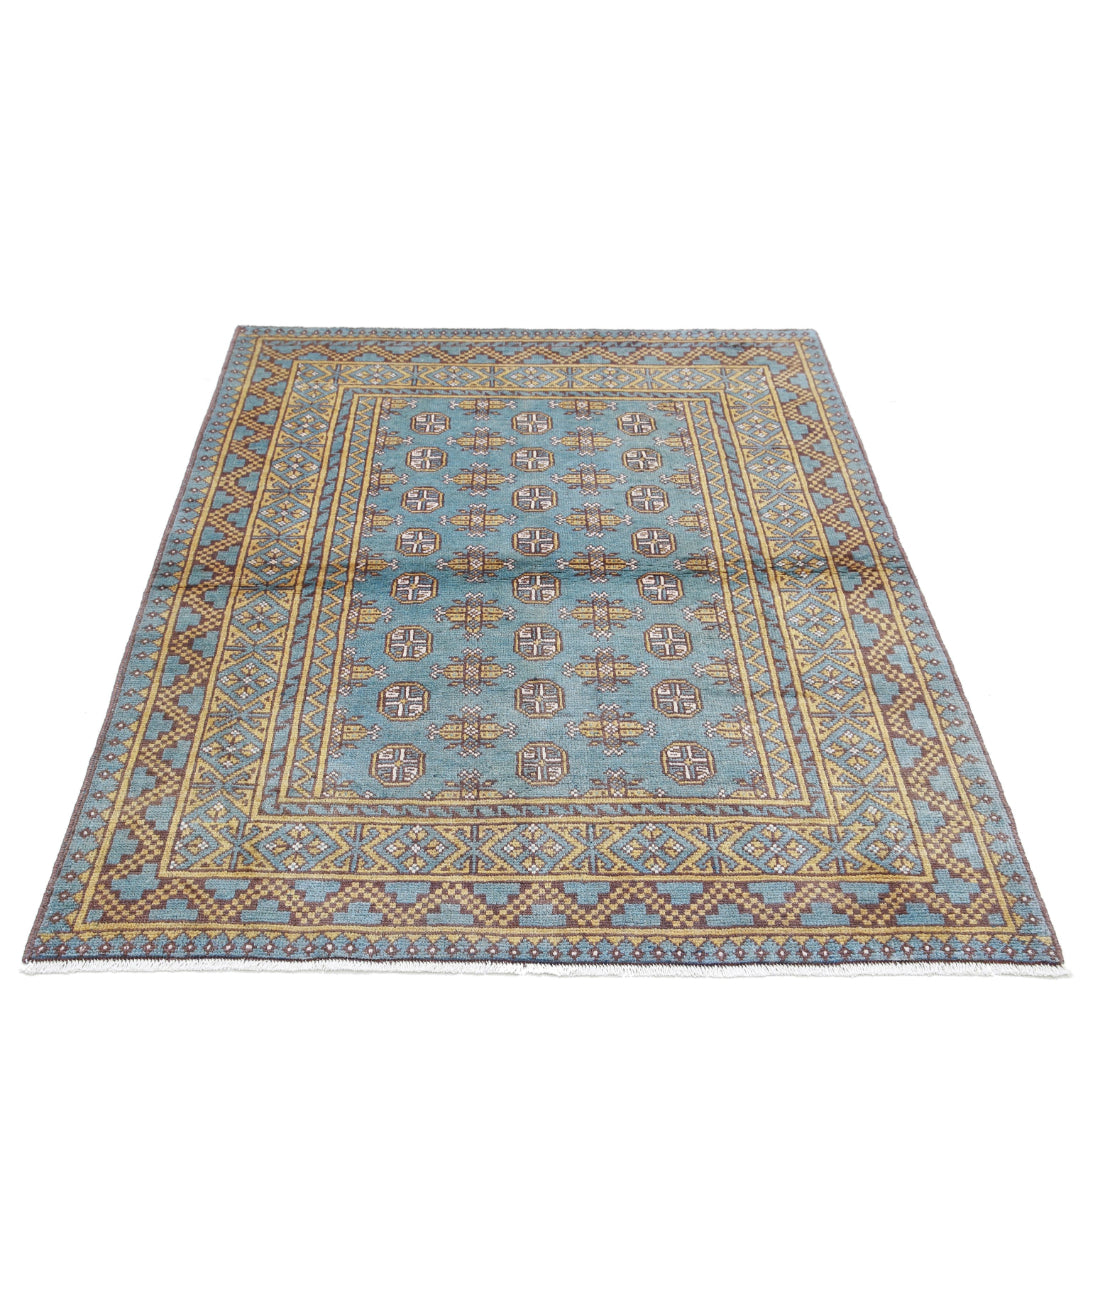 Revival 4'2'' X 5'7'' Hand-Knotted Wool Rug 4'2'' x 5'7'' (125 X 168) / Blue / Gold